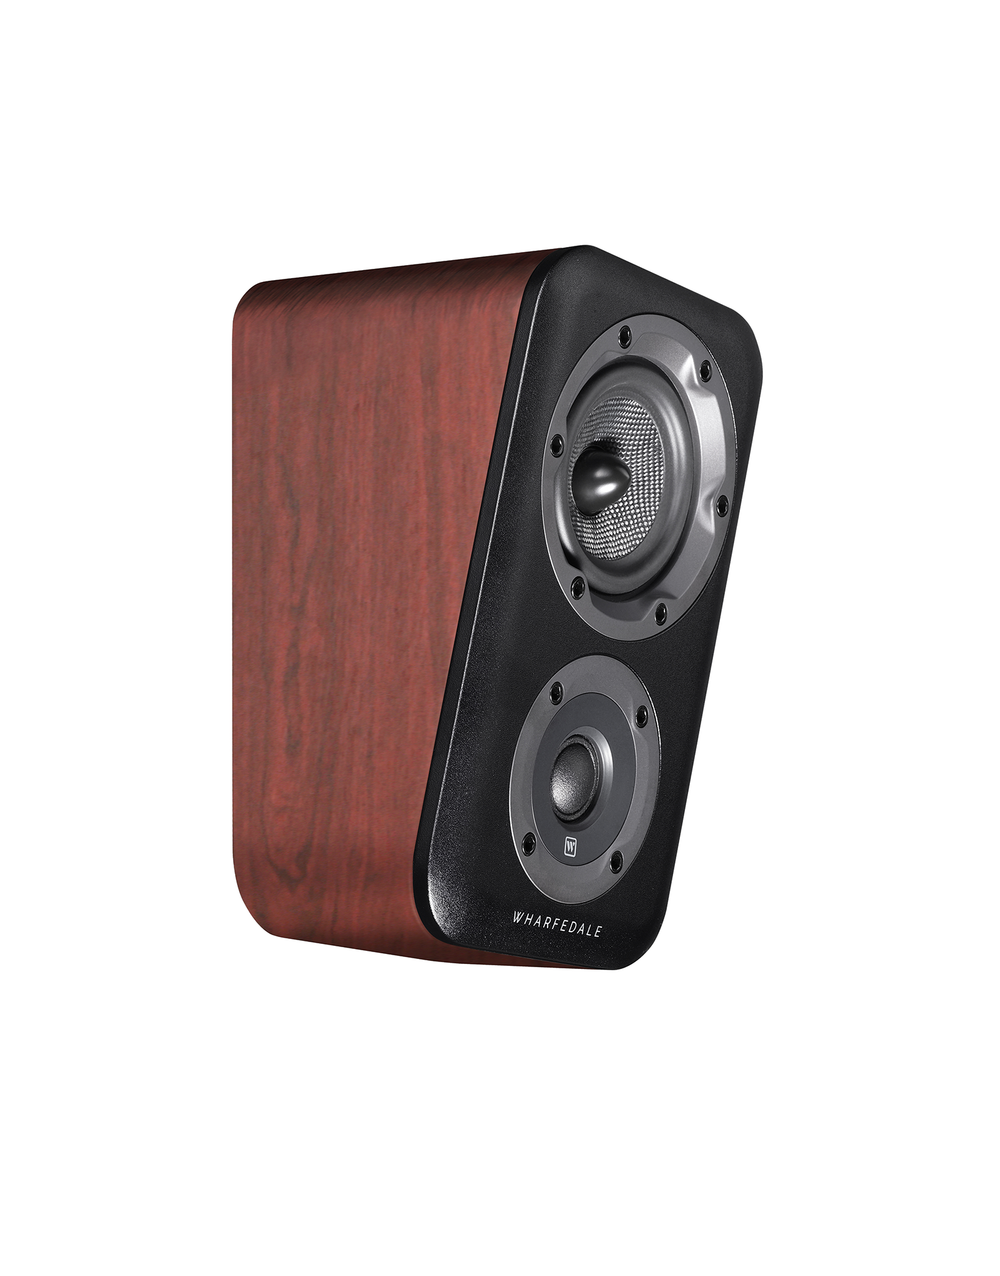 Wharfedale D300 Surround Speaker In Rosewood (Left)